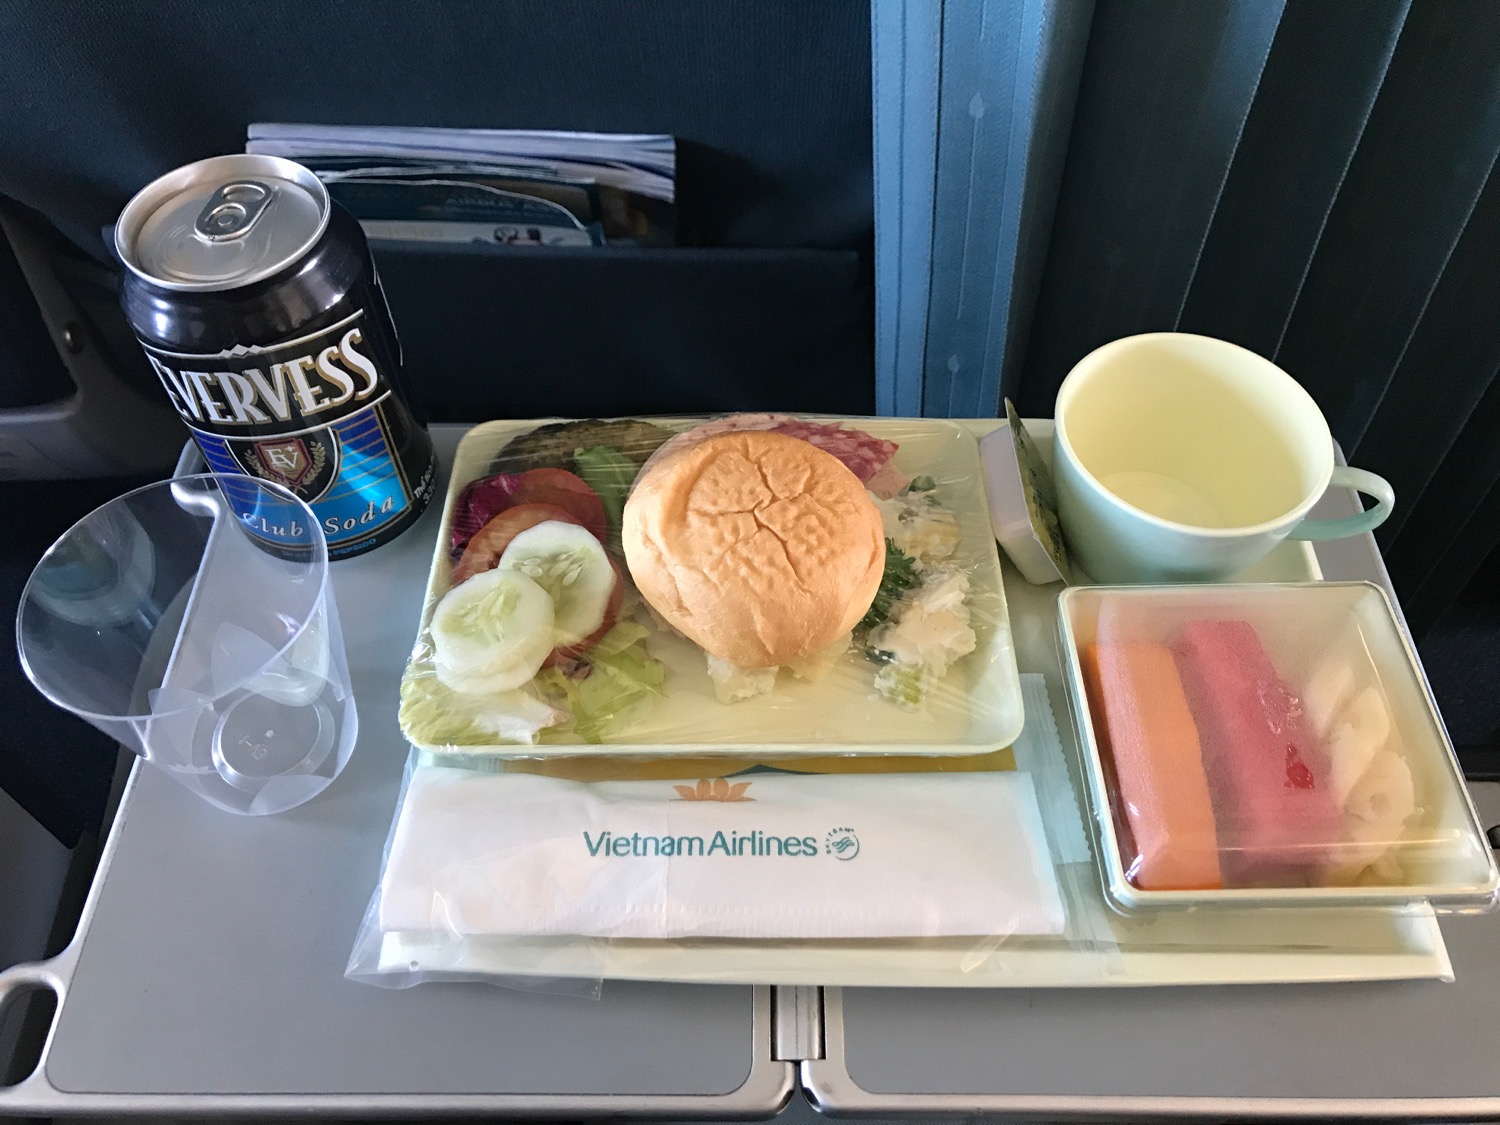 a tray with food and drink on a table